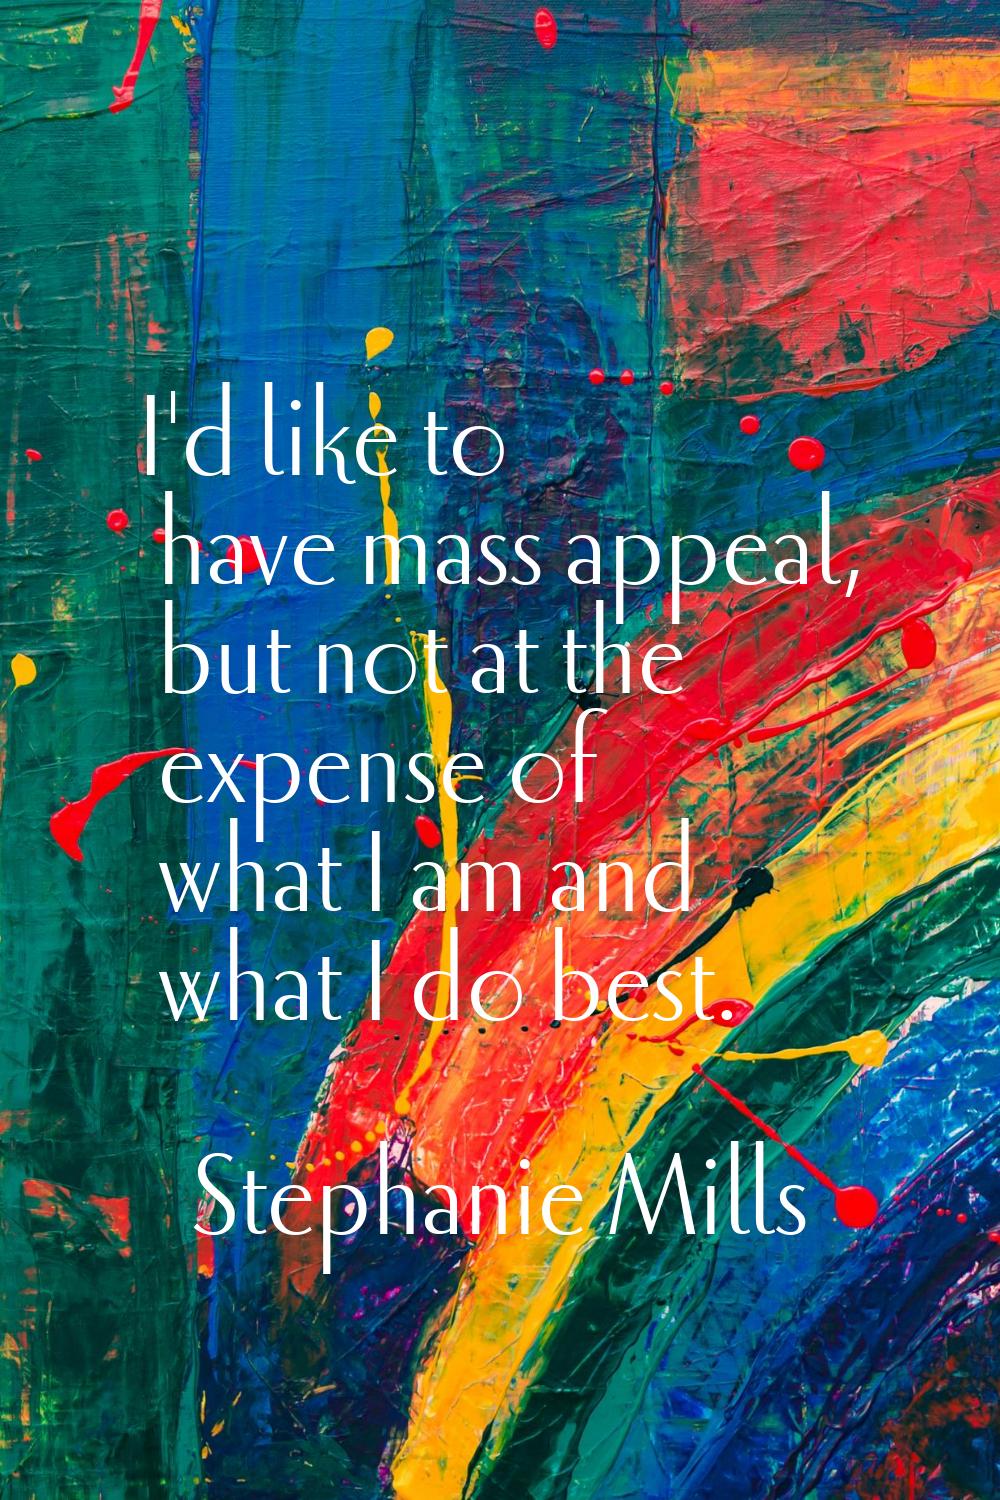 I'd like to have mass appeal, but not at the expense of what I am and what I do best.